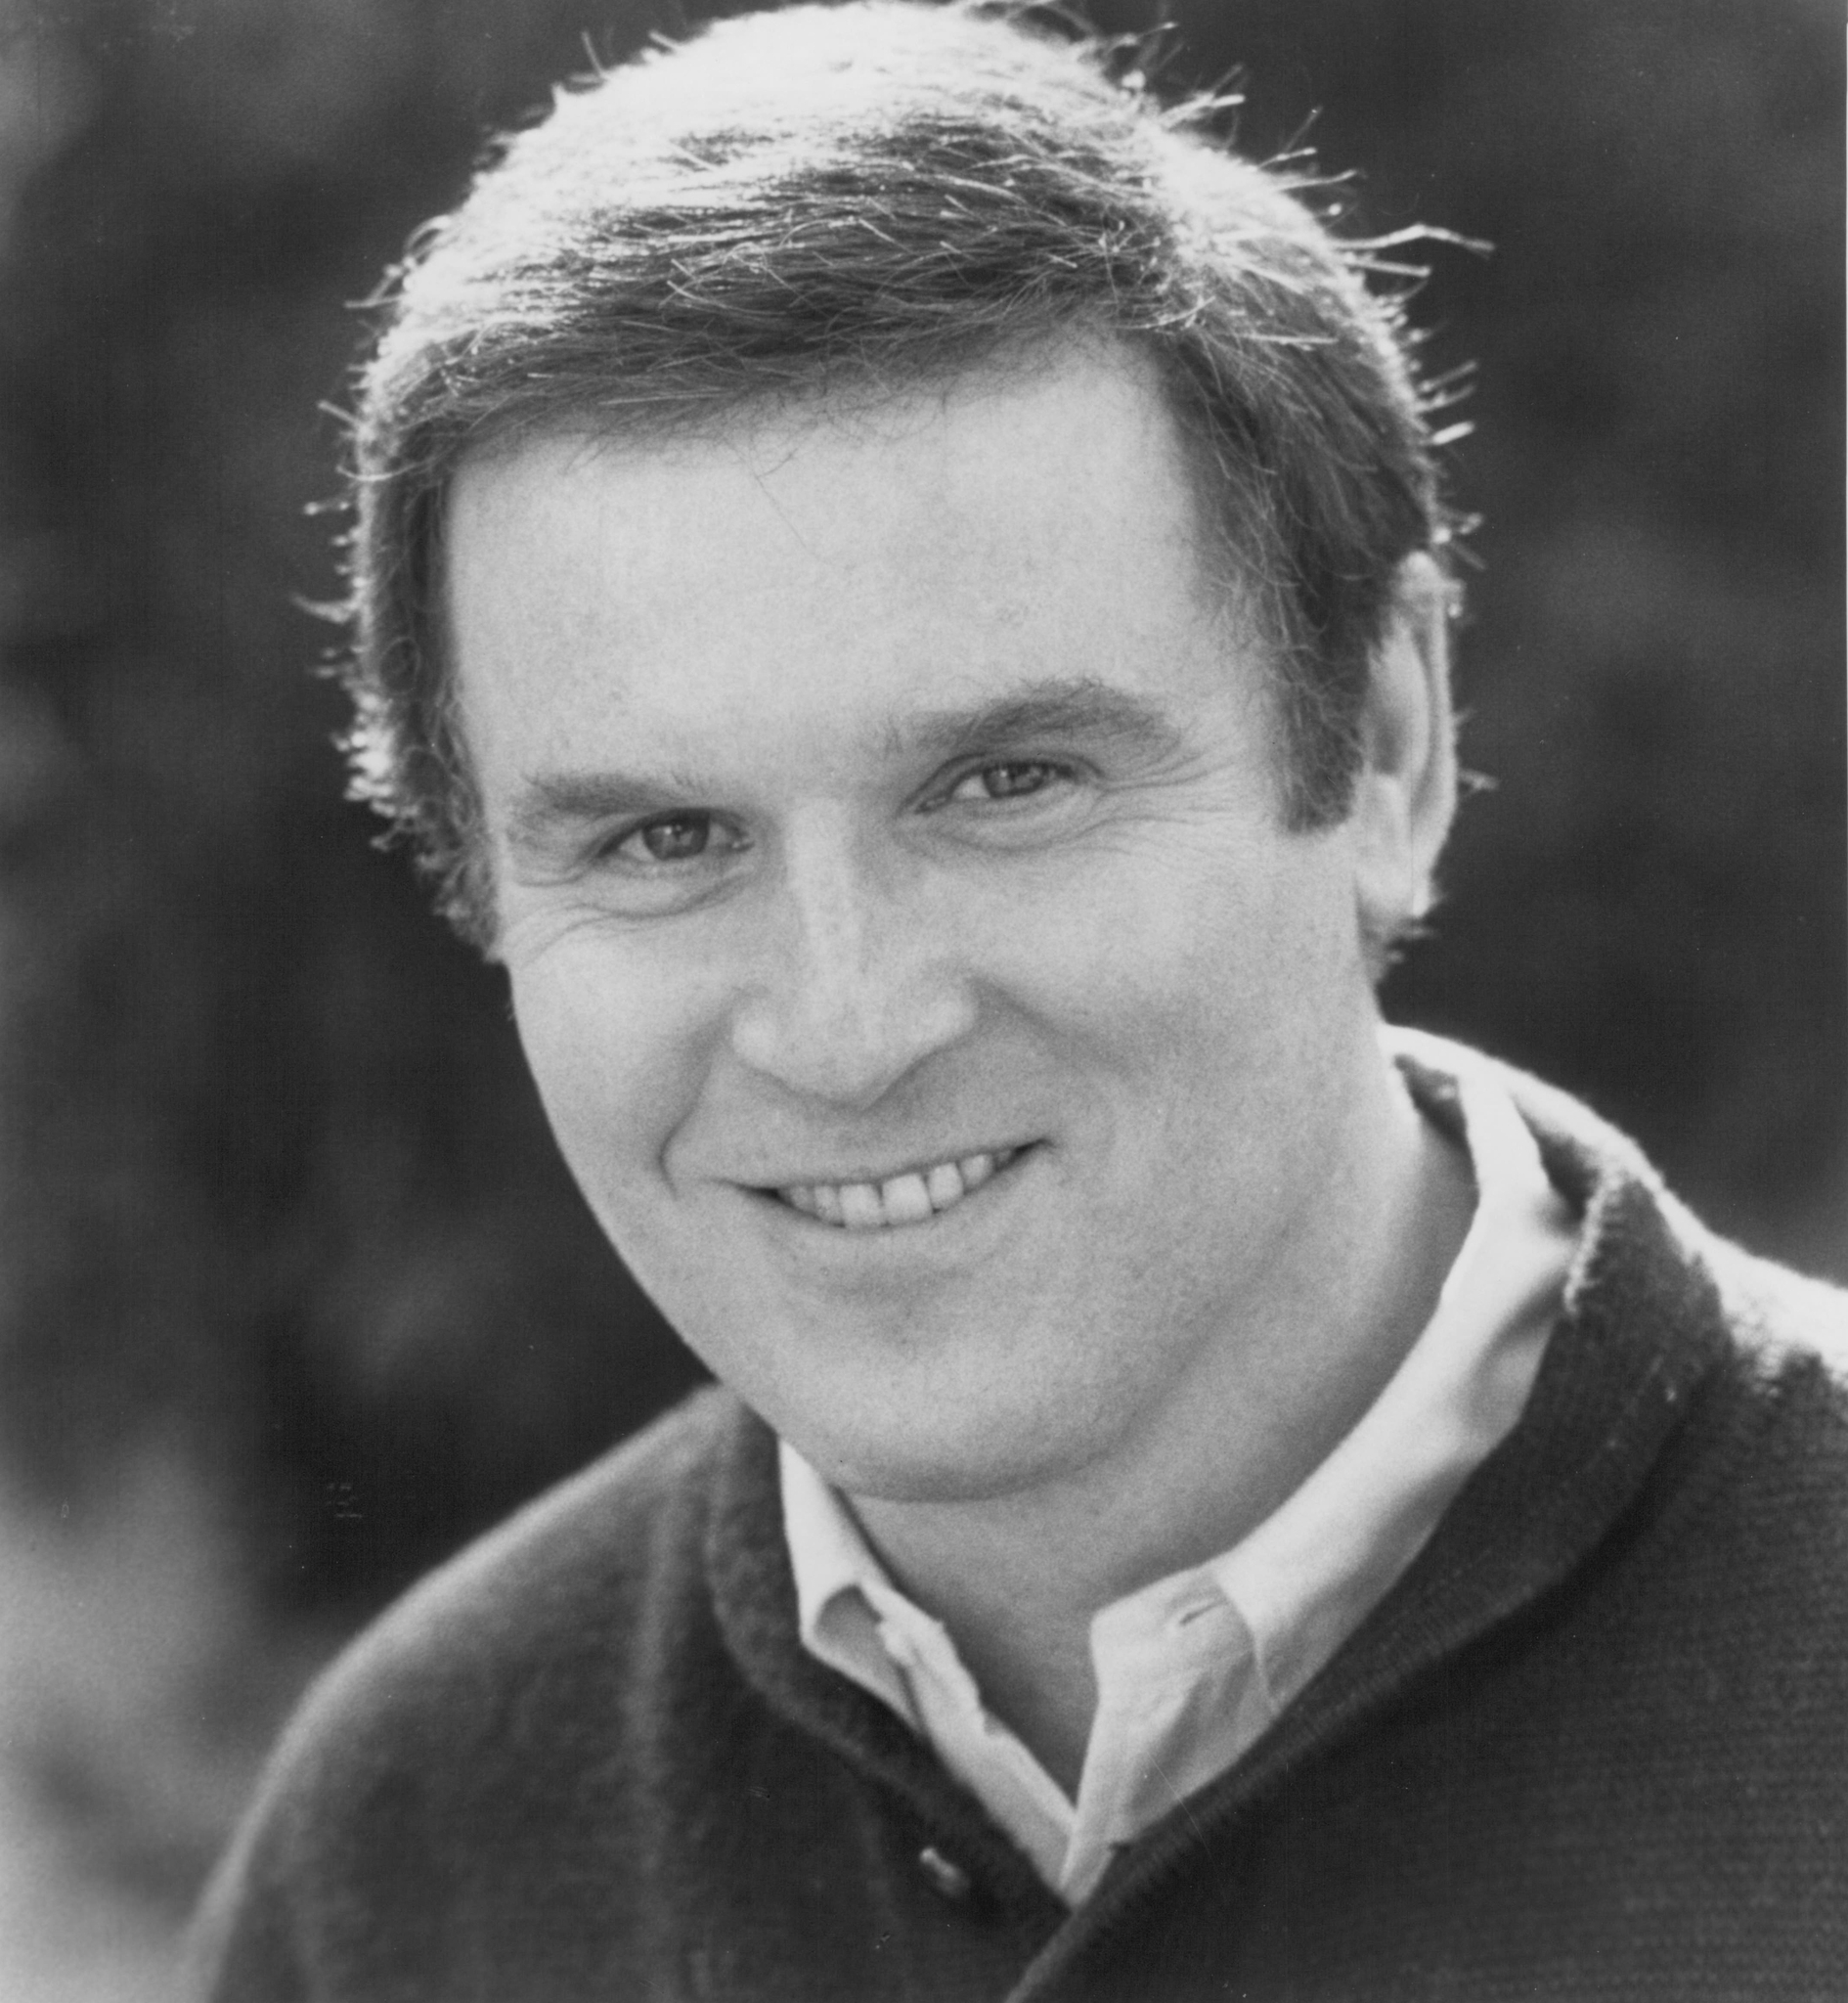 Charles Grodin - Funny and very professional.